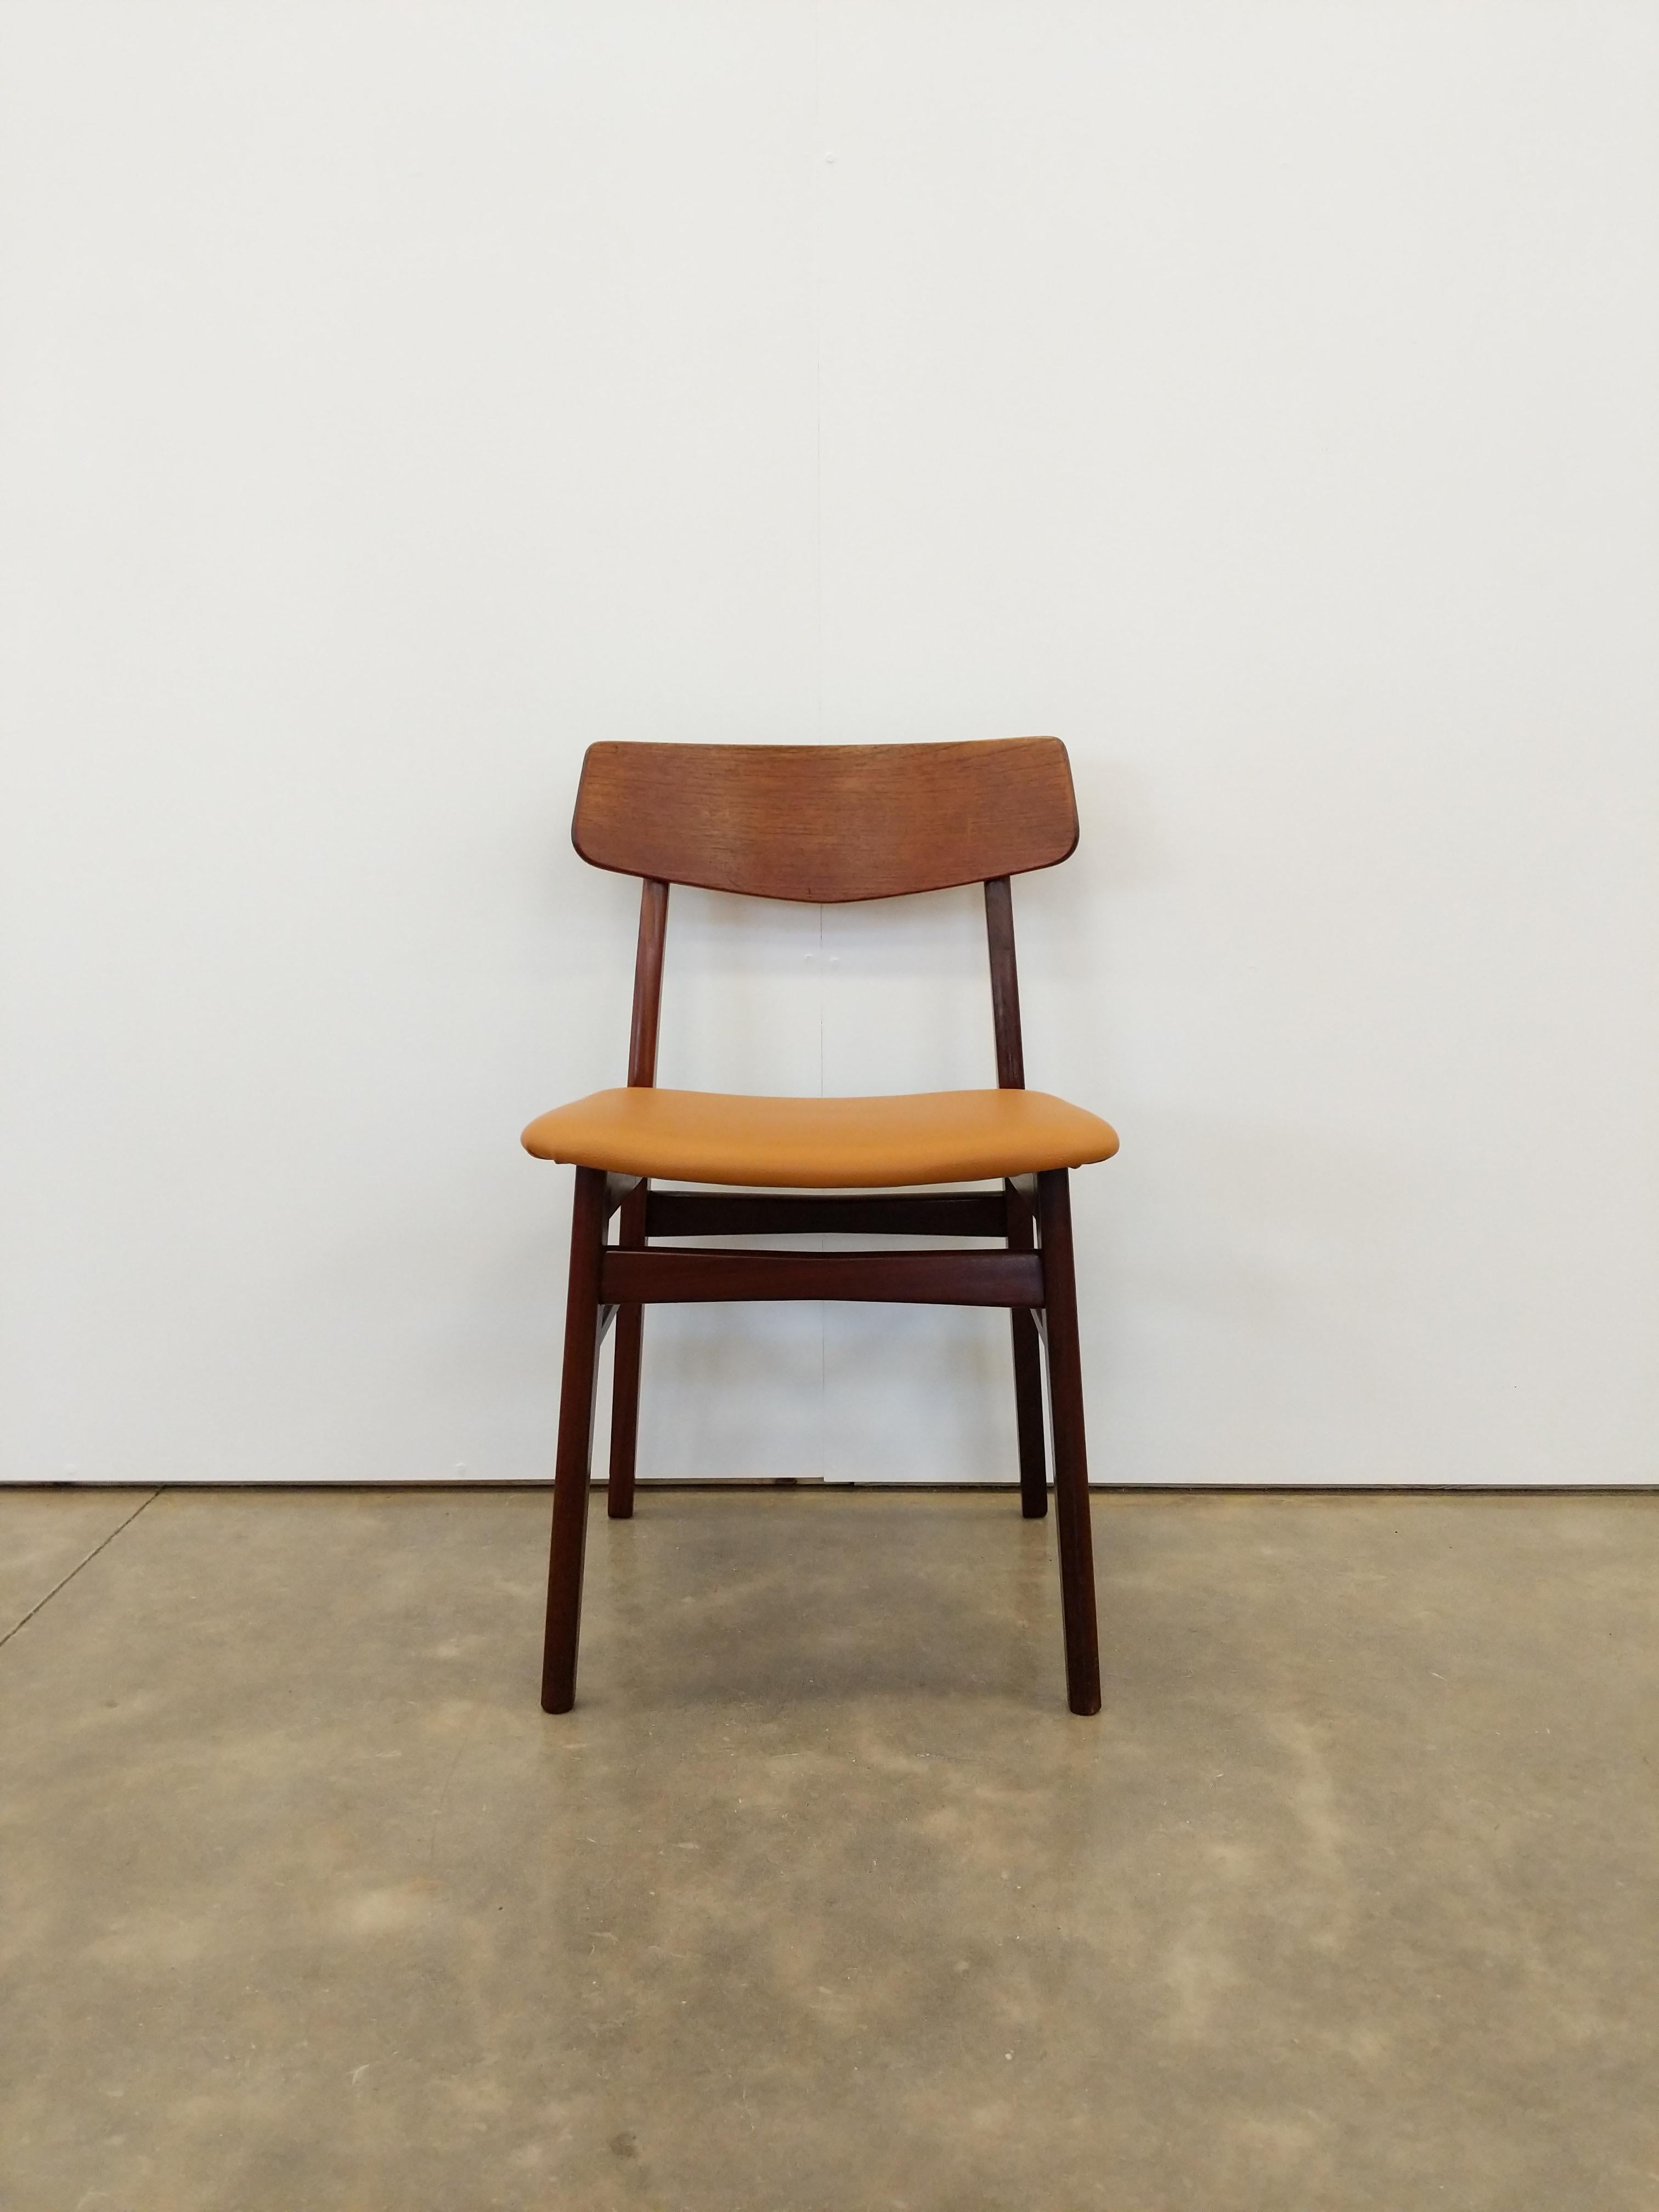 20th Century Vintage Danish Mid Century Modern Dining Chair For Sale